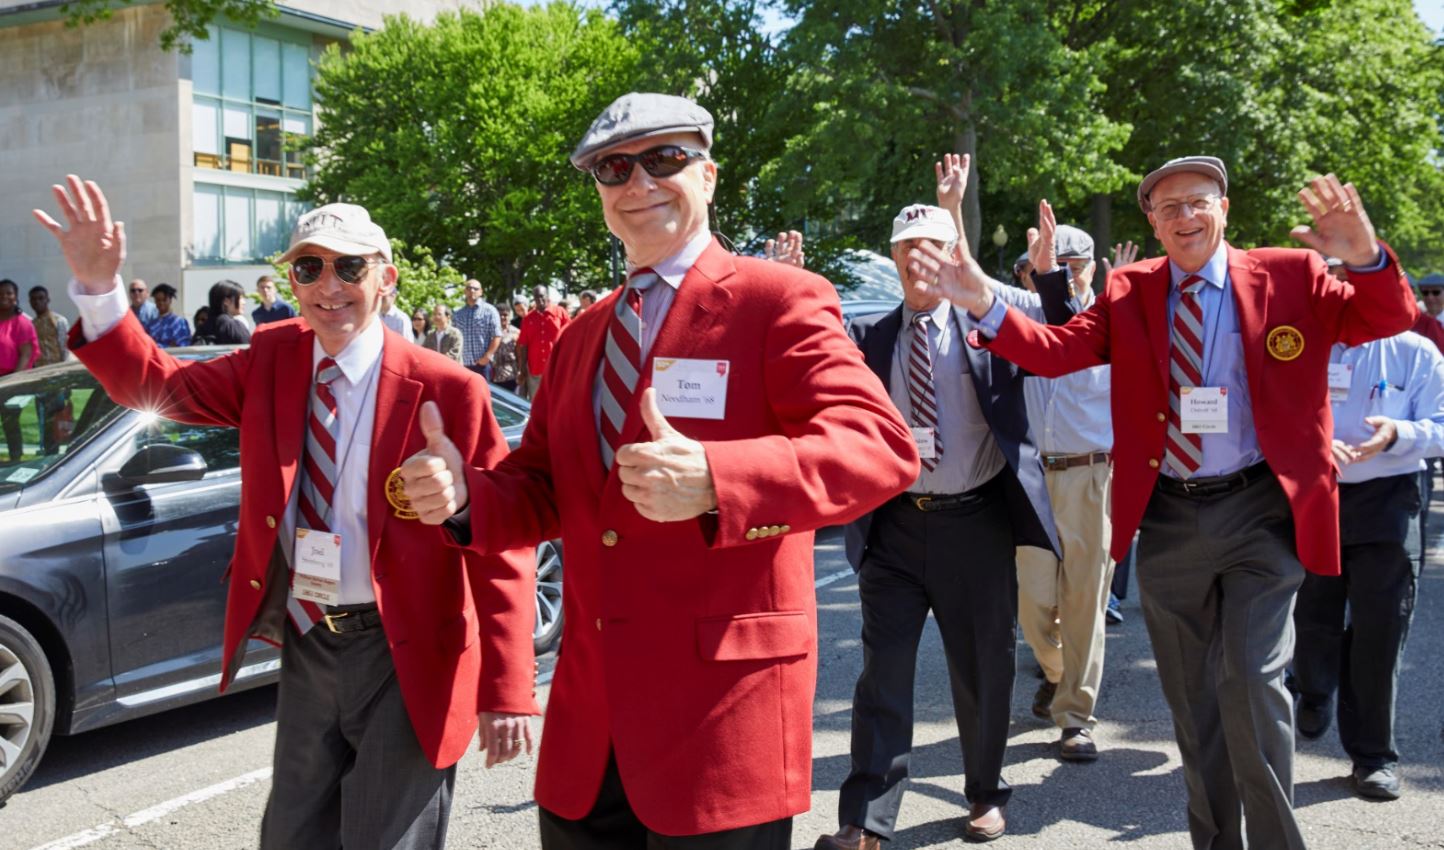 MIT alumni from the Class of 1969 march with their red jackets during Tech Reunions.